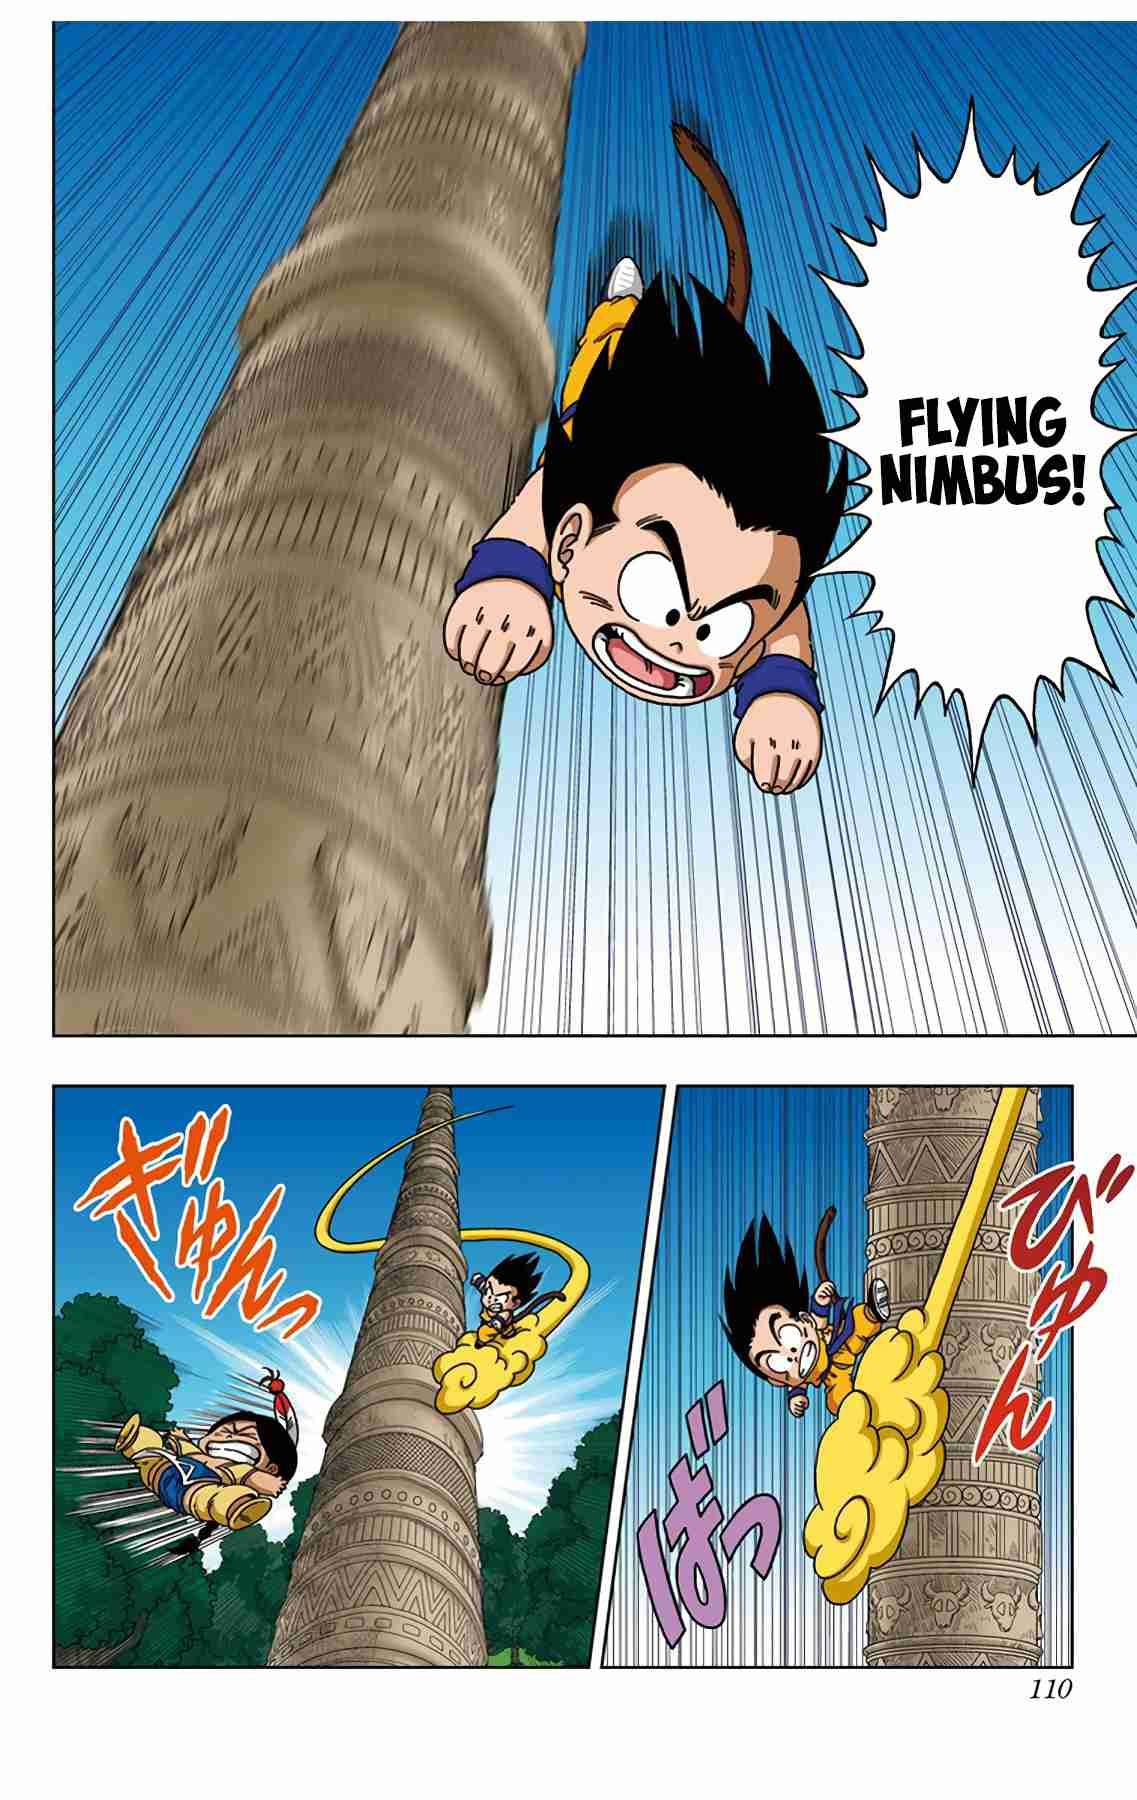 Dragon Ball SD Vol. 3 Ch. 24 Snatch It! The Super Holy Water!